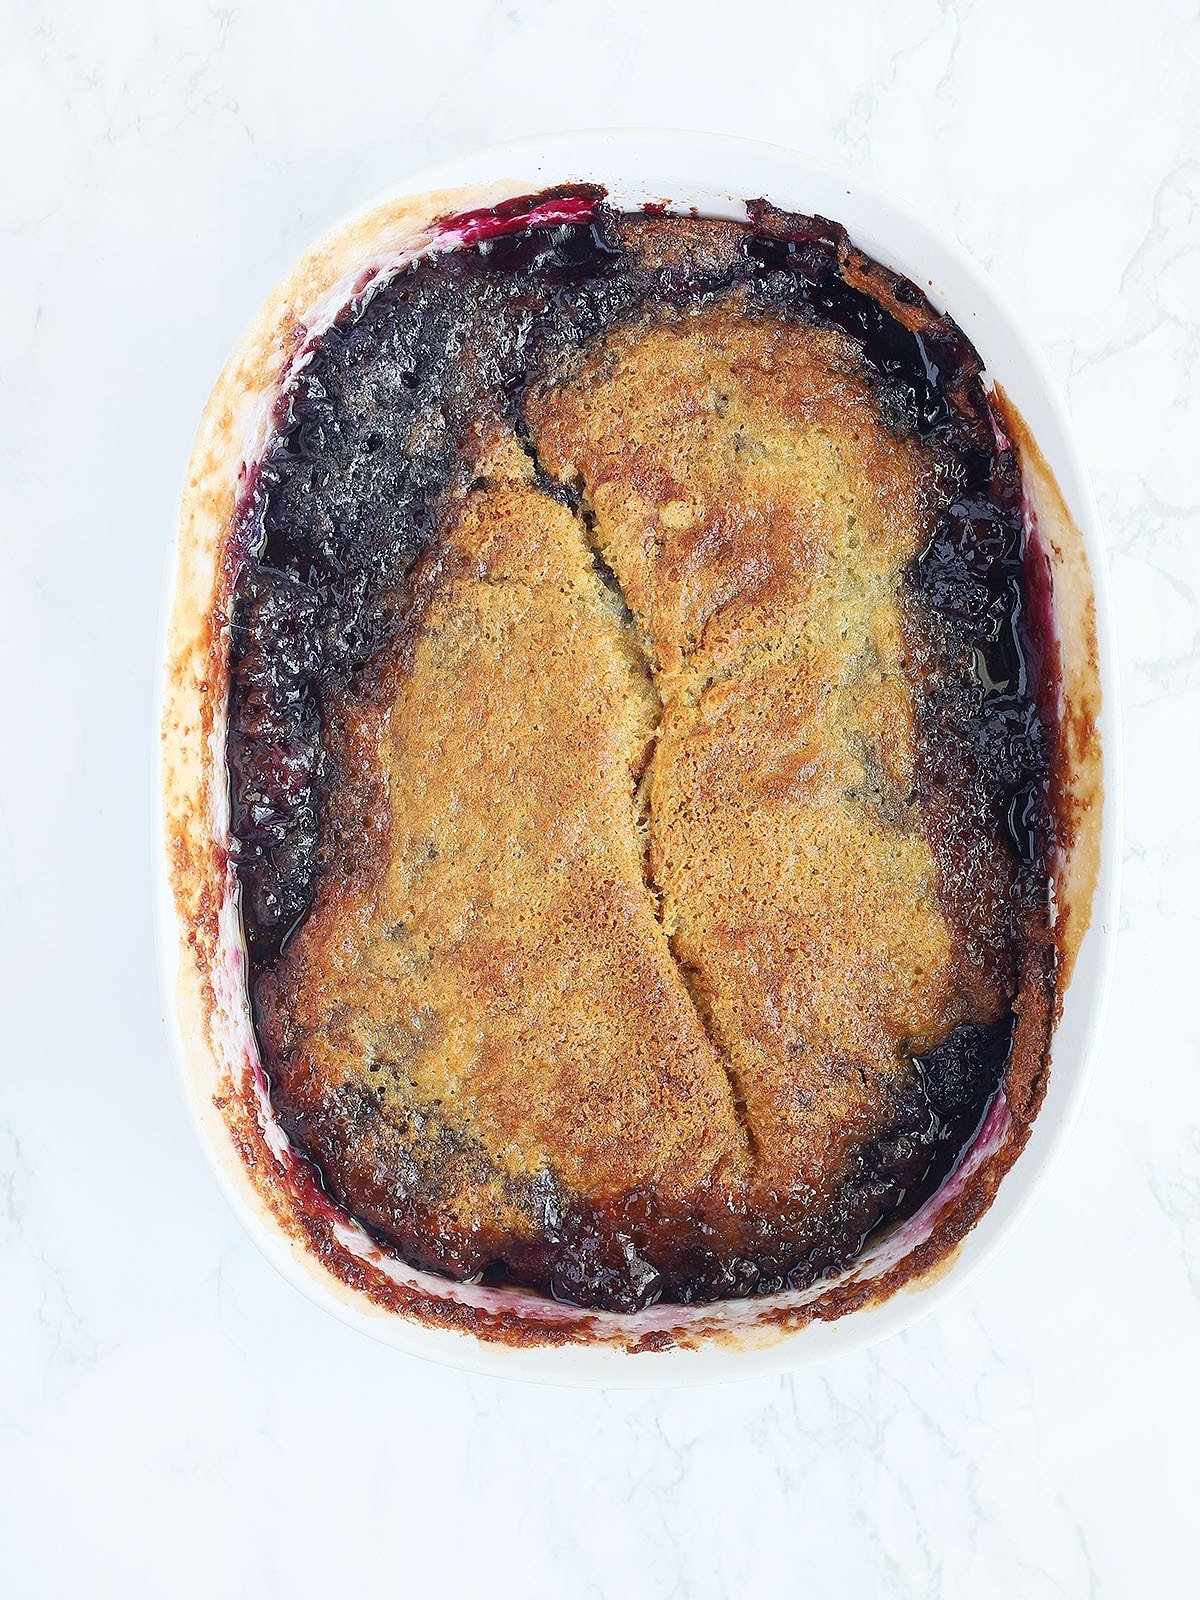 baked southern blackberry cobbler right out of the oven